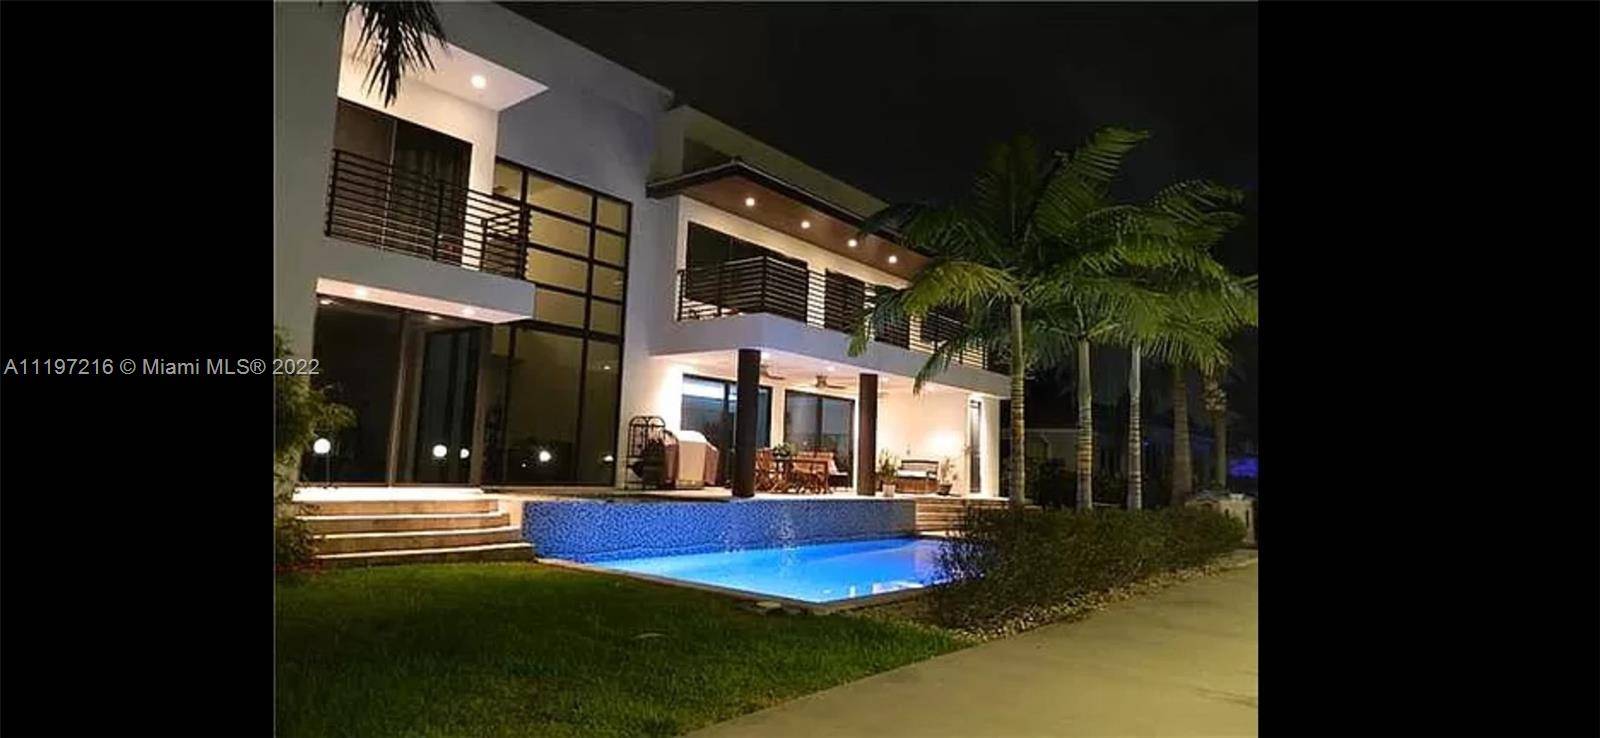 Contemporary home with clean lines throughout has Unique Architectural elements.